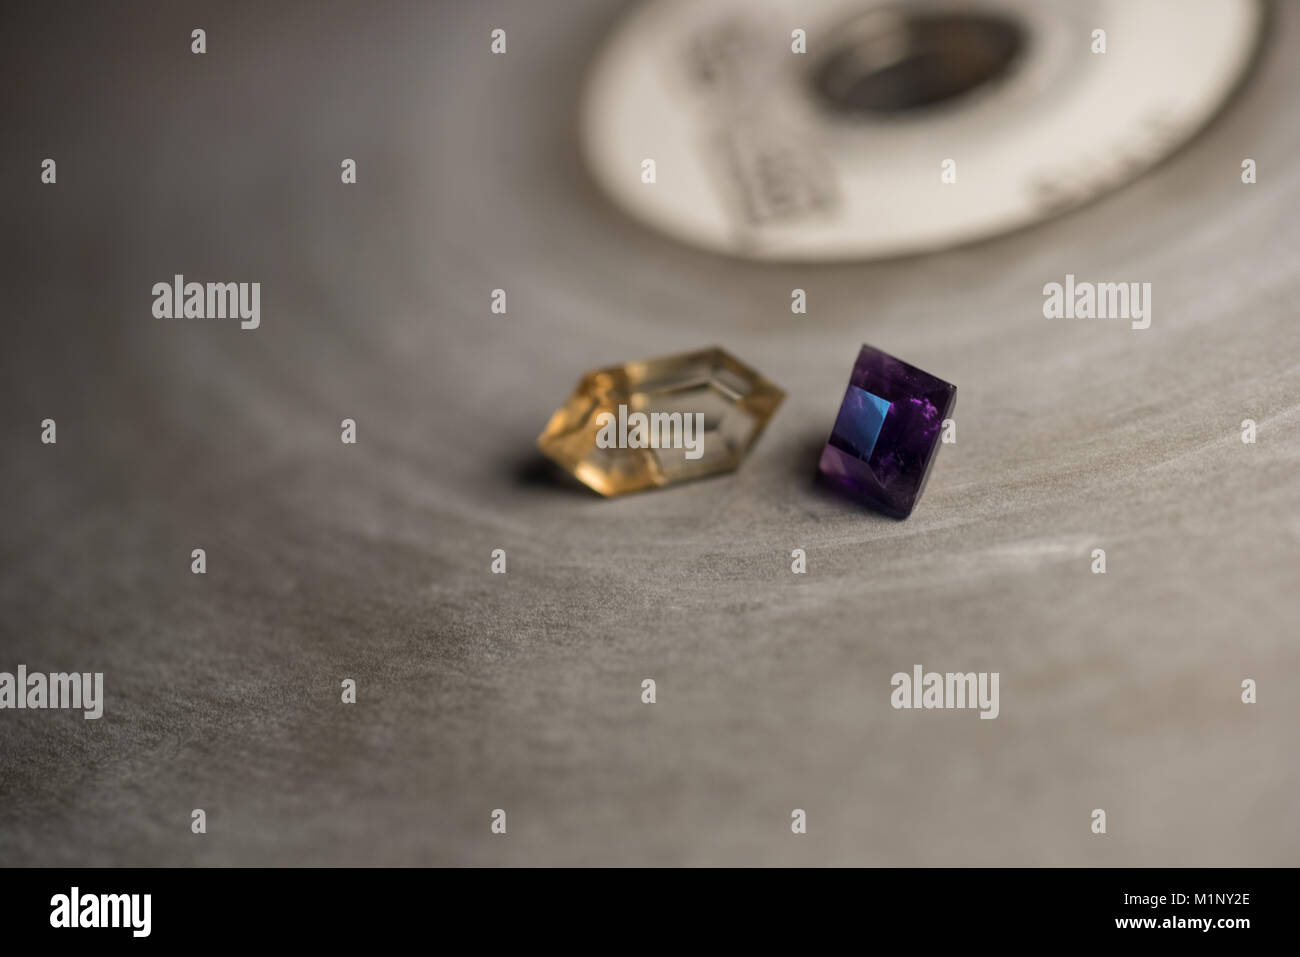 Amethyst and sunstone on a faceting lap with shallow depth-of-field. Stock Photo